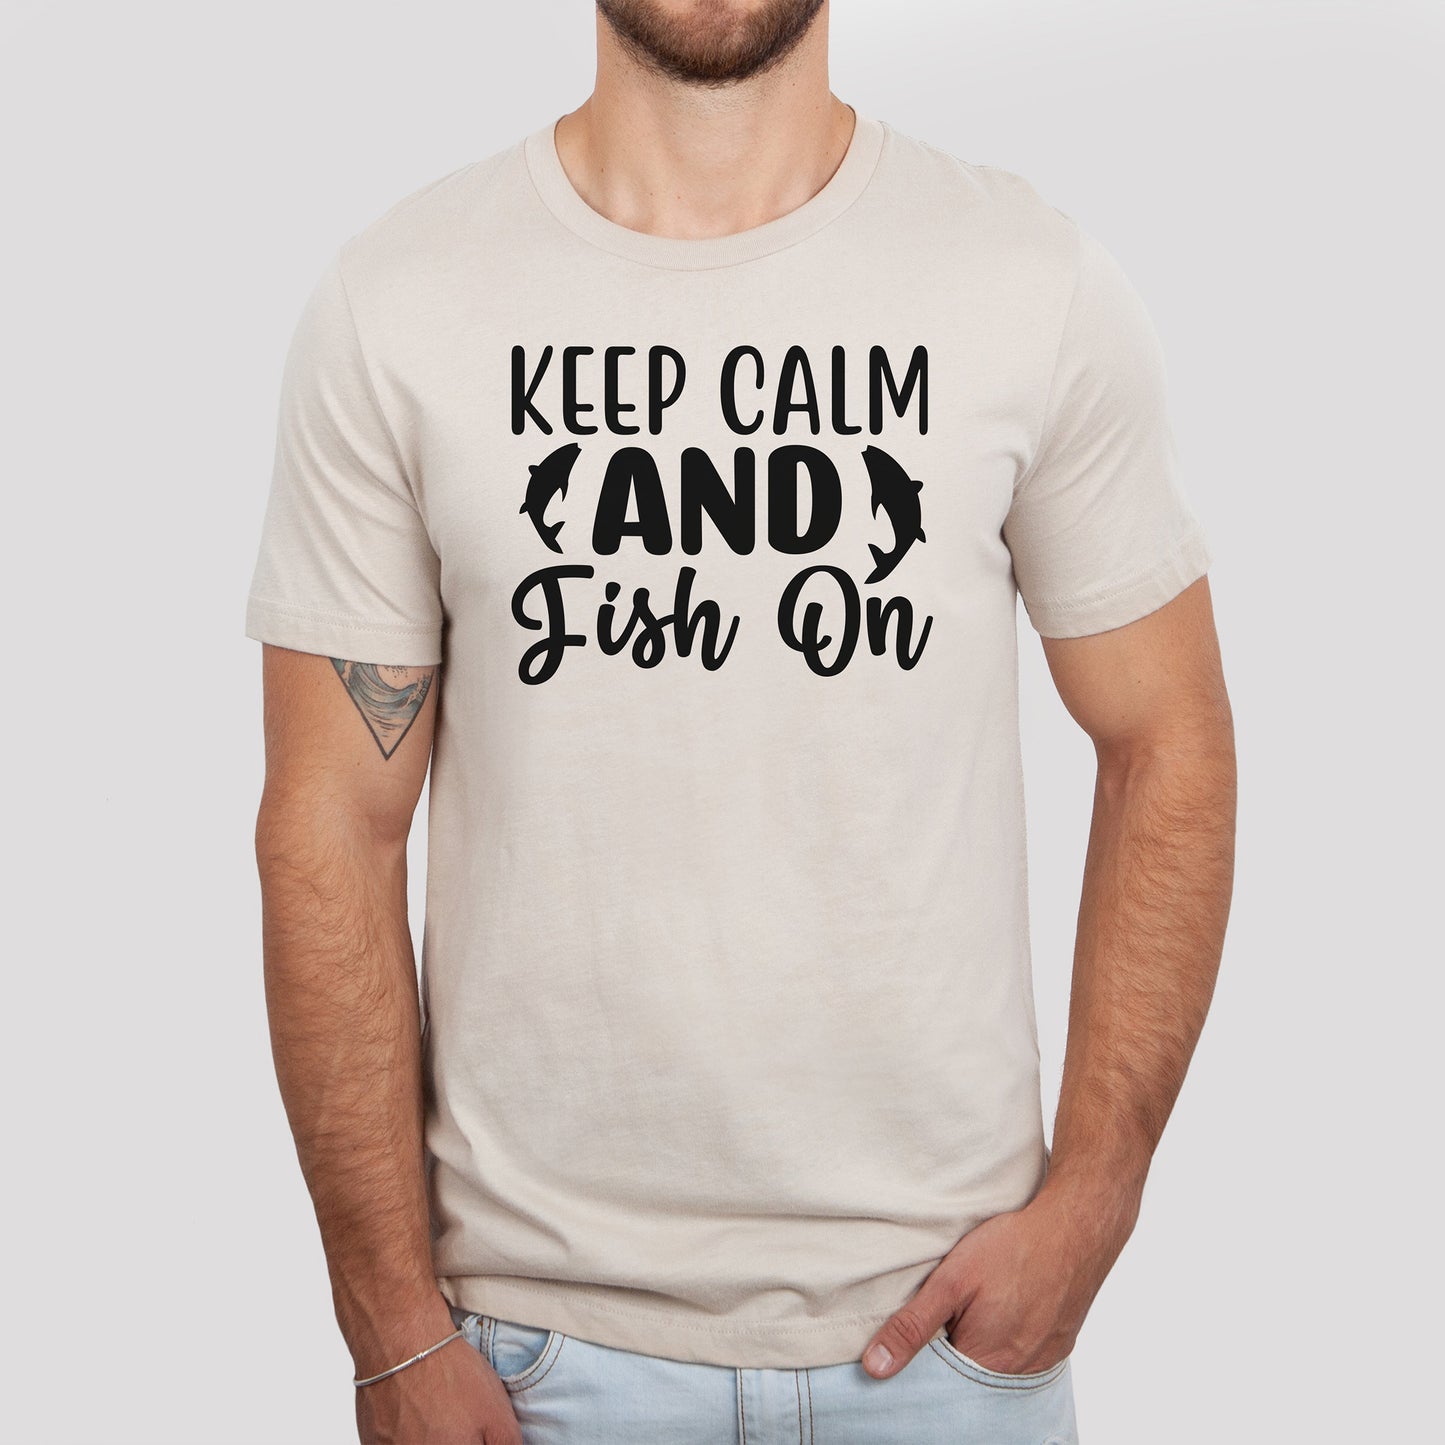 "Keep Calm and Fish On" With Two Fish Graphic